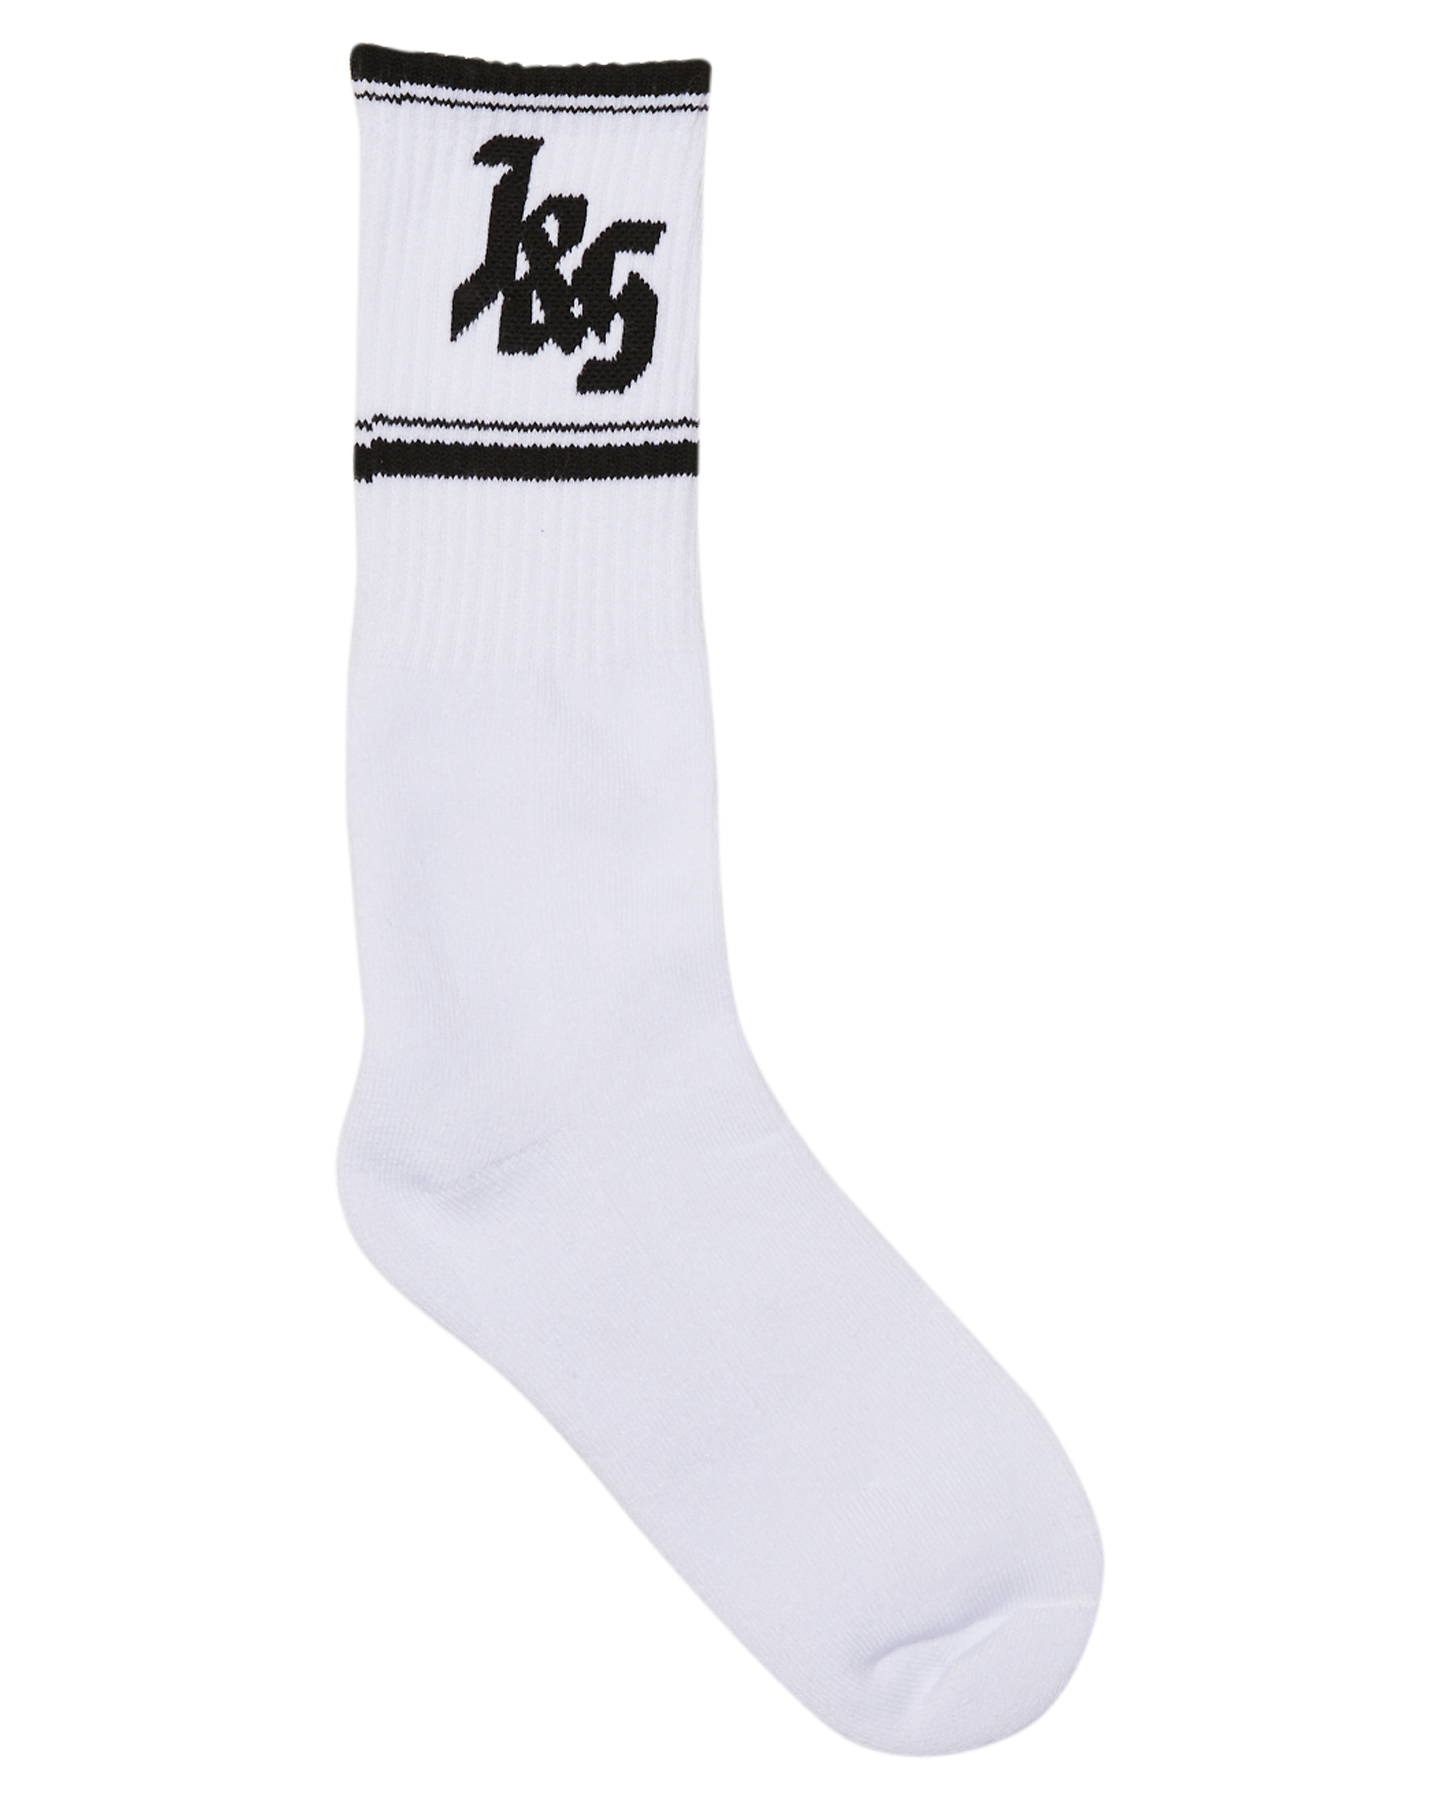 Jagger And Stone Socks - White | SurfStitch